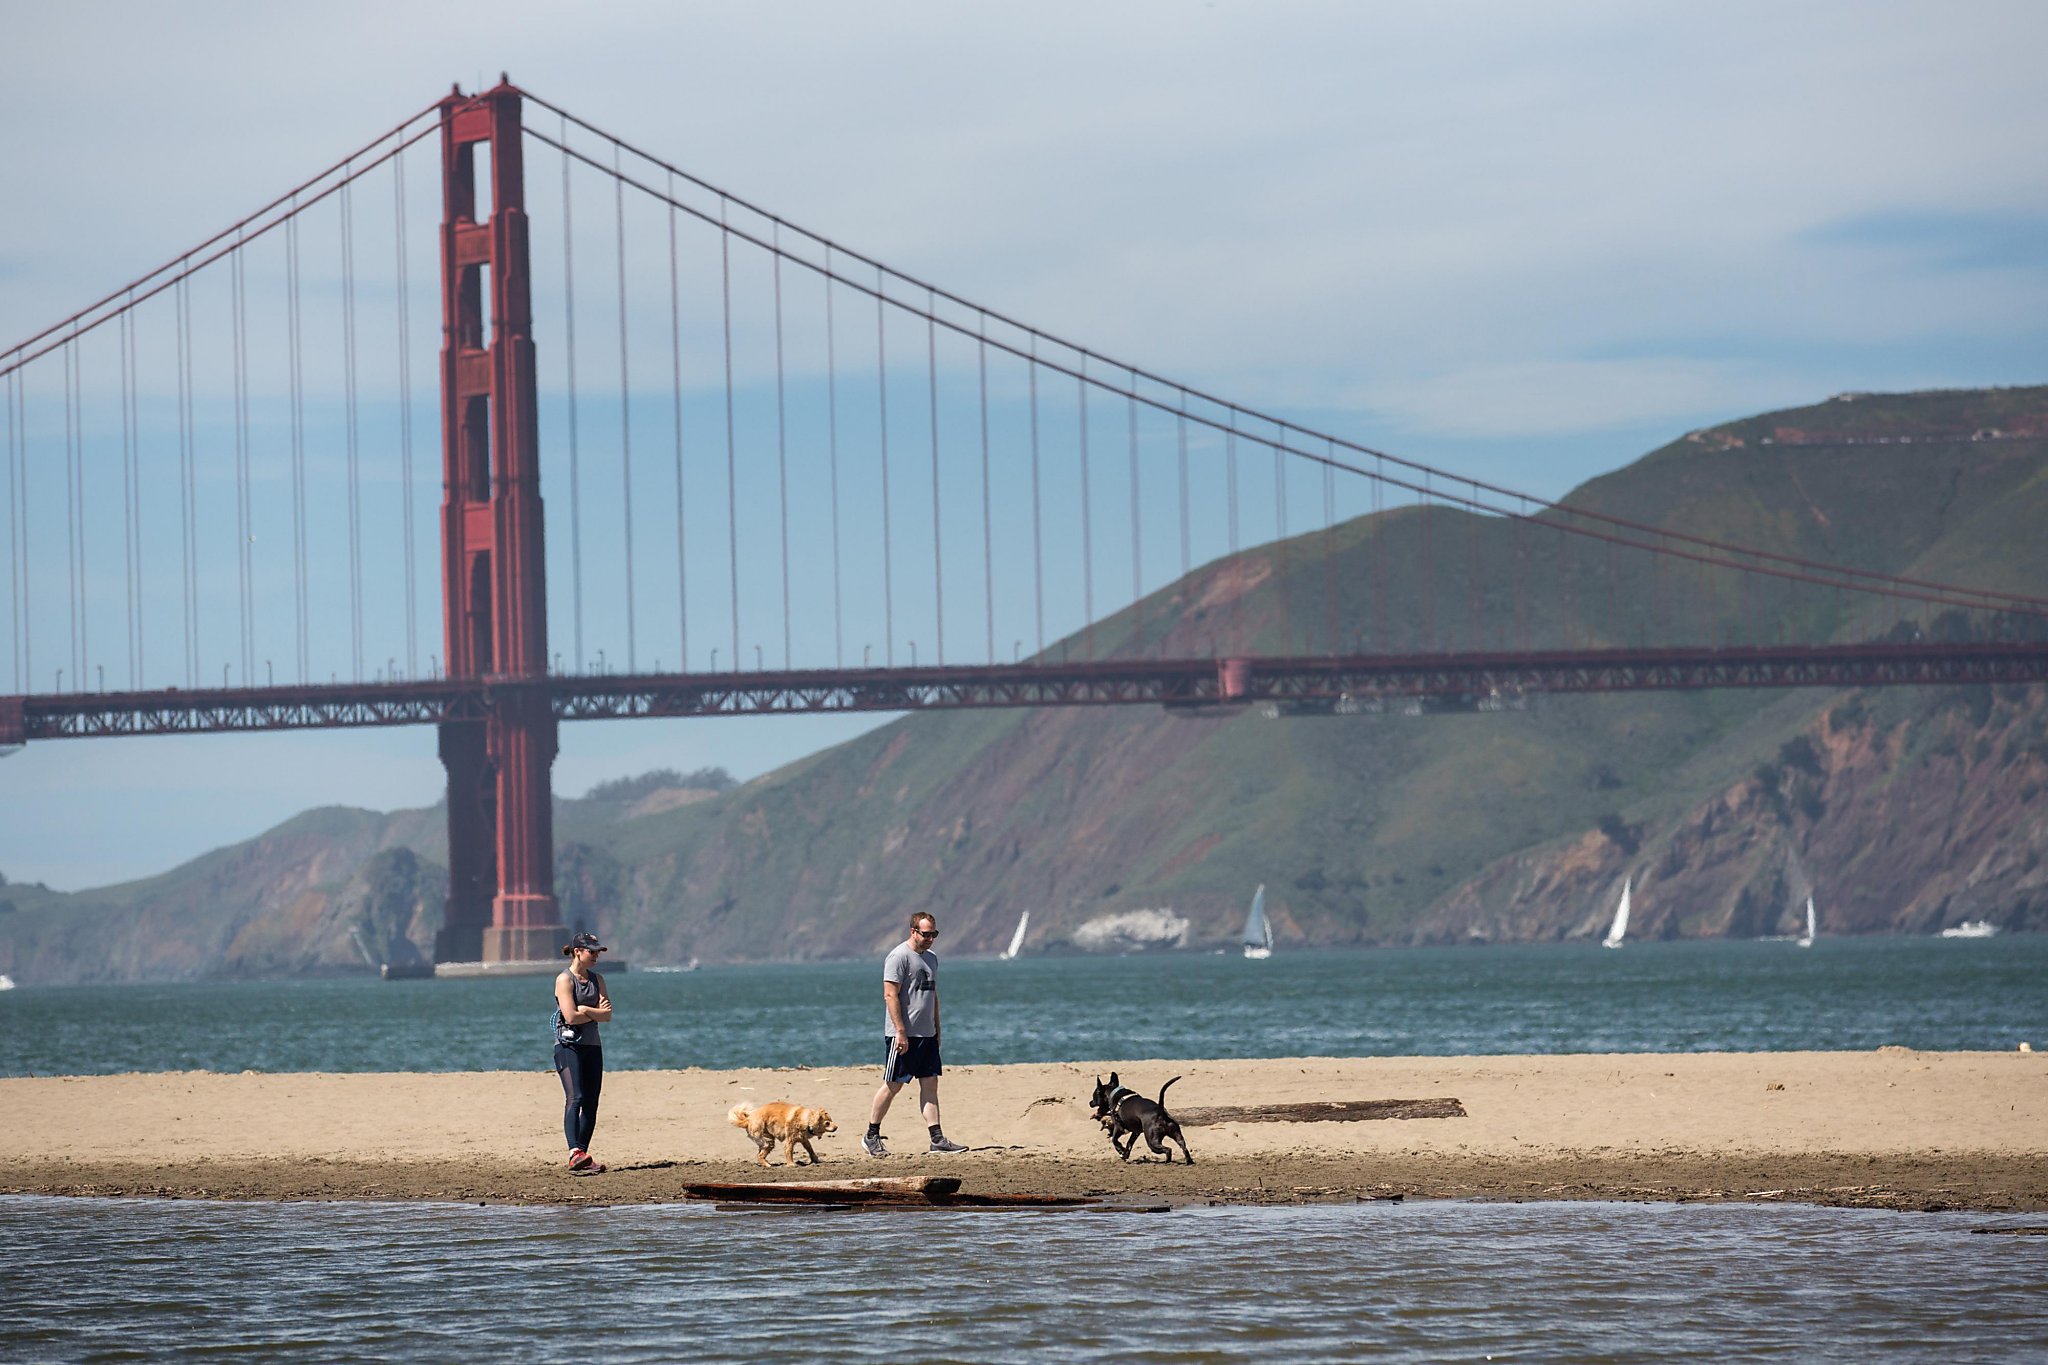 crissy field in sf s presidio next in line for changes as tunnel tops work proceeds sfchronicle com crissy field in sf s presidio next in